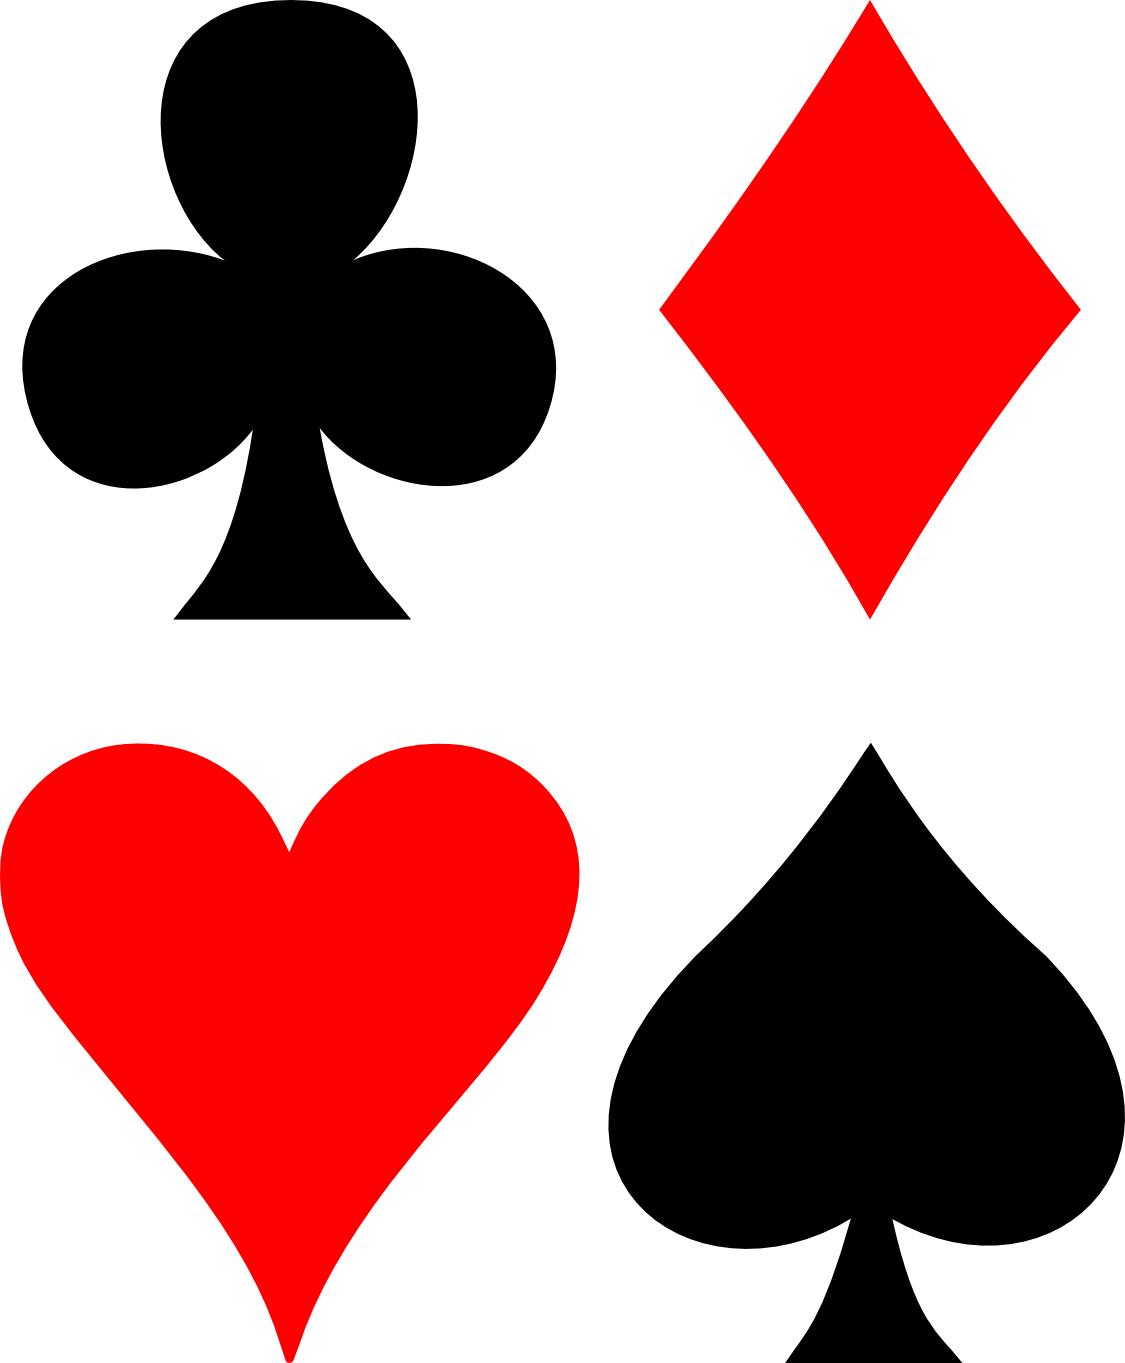 0 Result Images of Simbolos De Cartas - PNG Image Collection